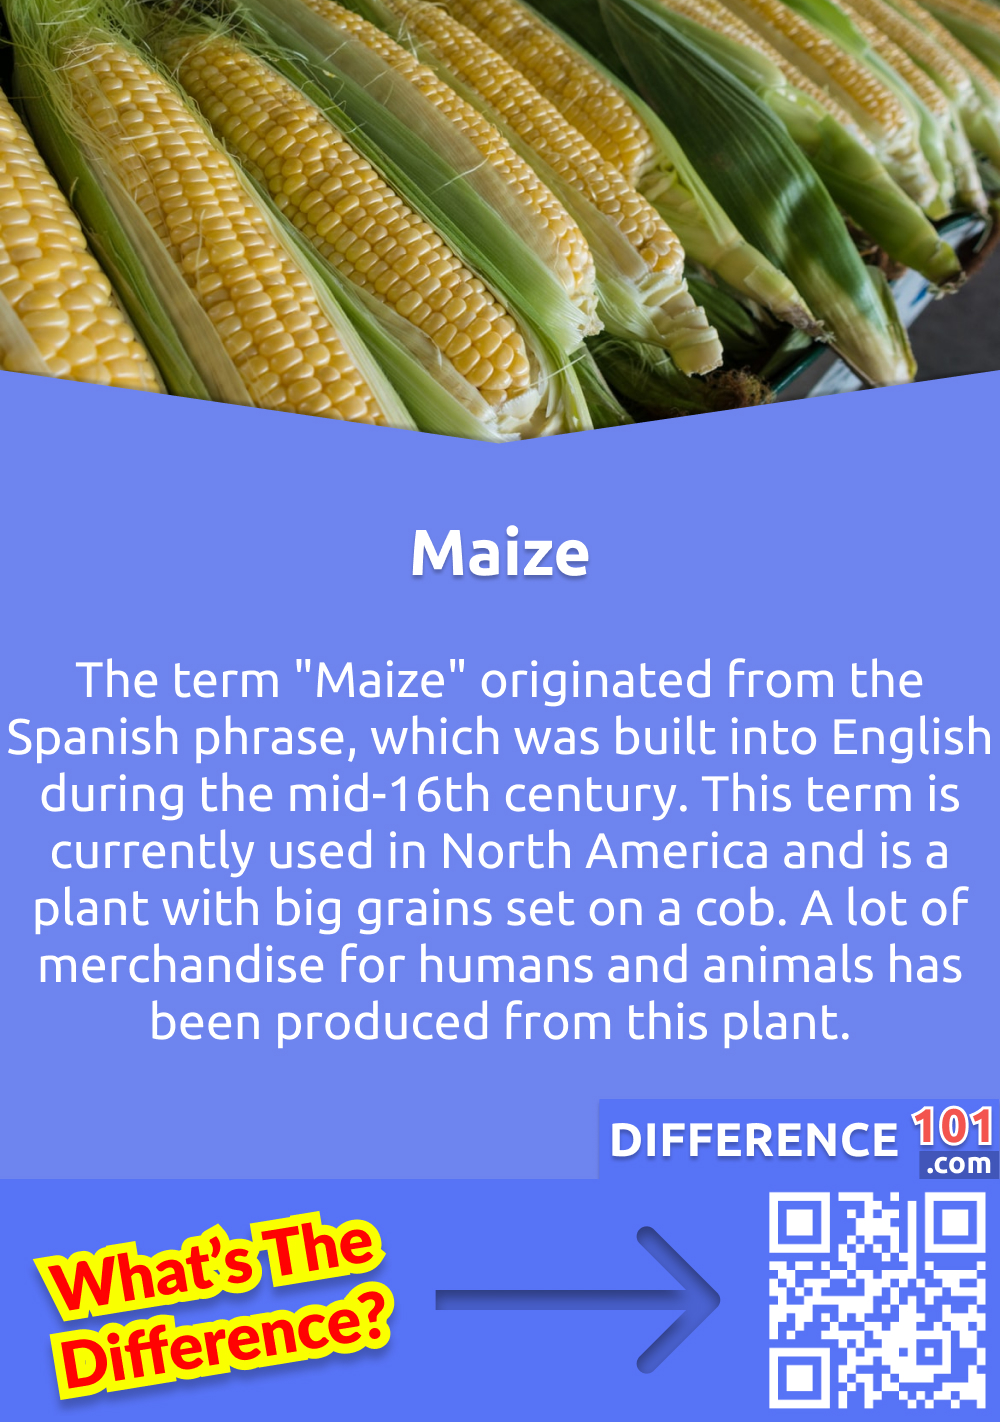 What is Maize? The term "Maize" originated from the Spanish phrase, which was built into English during the mid-16th century. This term is currently used in North America and is a plant with big grains set on a cob. A lot of merchandise for humans and animals has been produced from this plant.